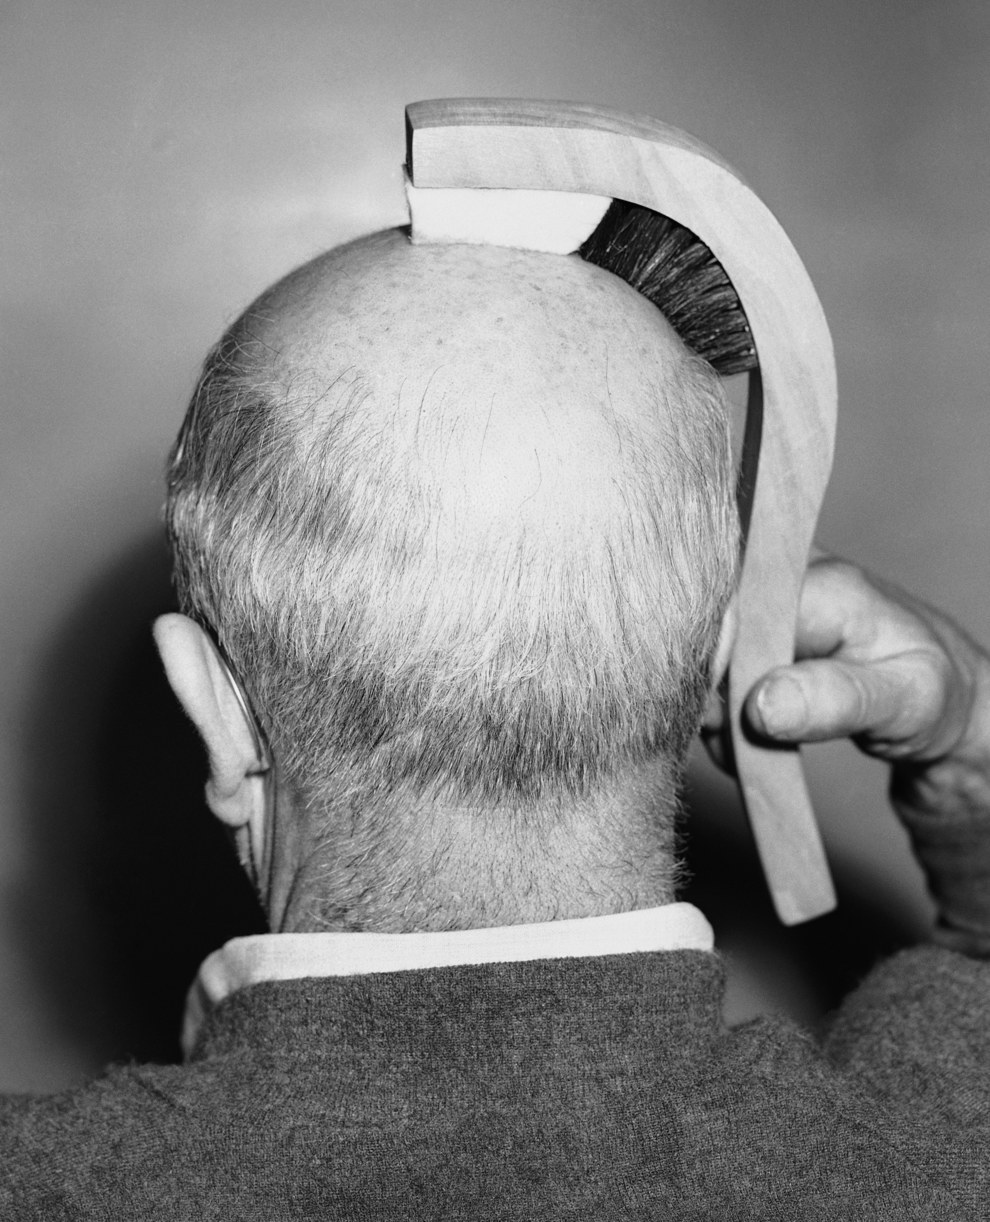 The ‘Hairline Brush’ gently massaged the scalp and brushed the hair at the same time, 1950.